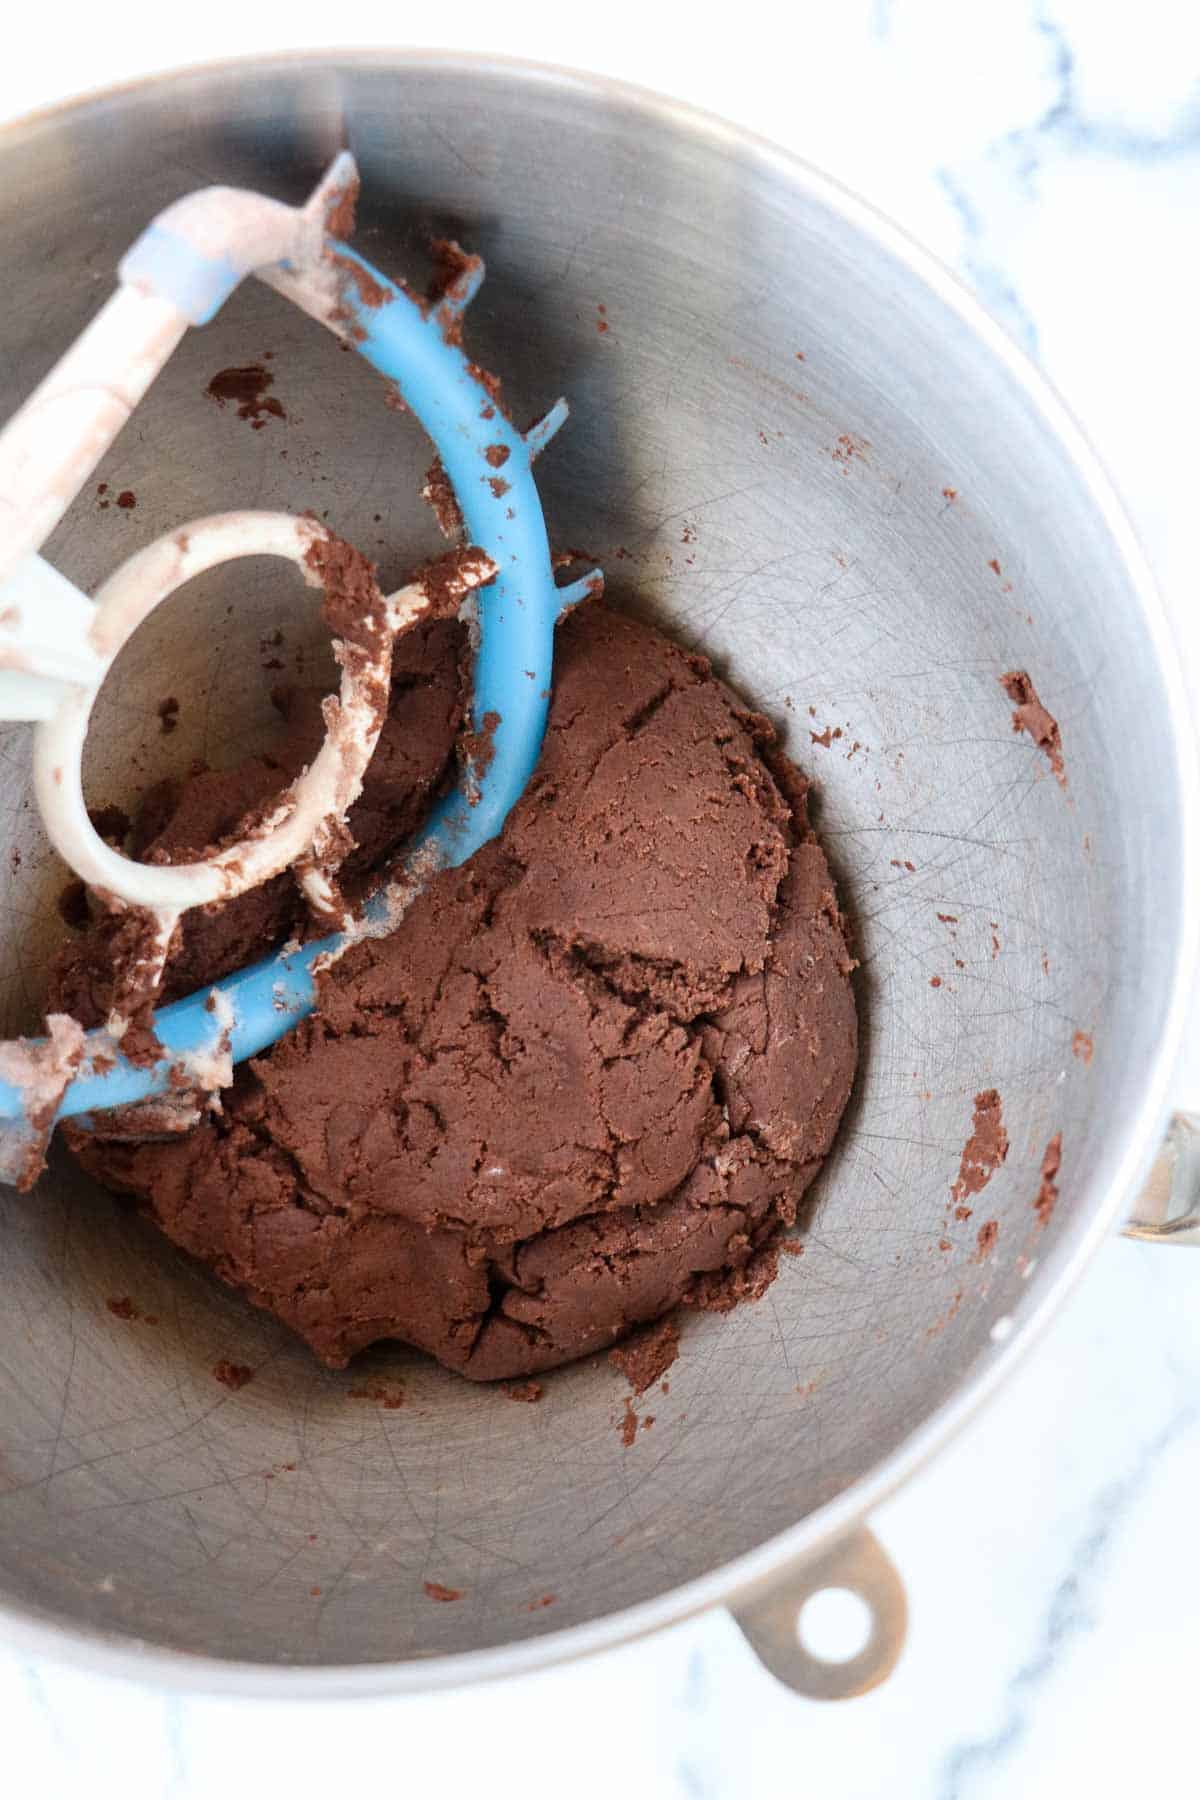 Chocolate cookie dough in a metal bowl with a blue paddle attachment for a mixer.